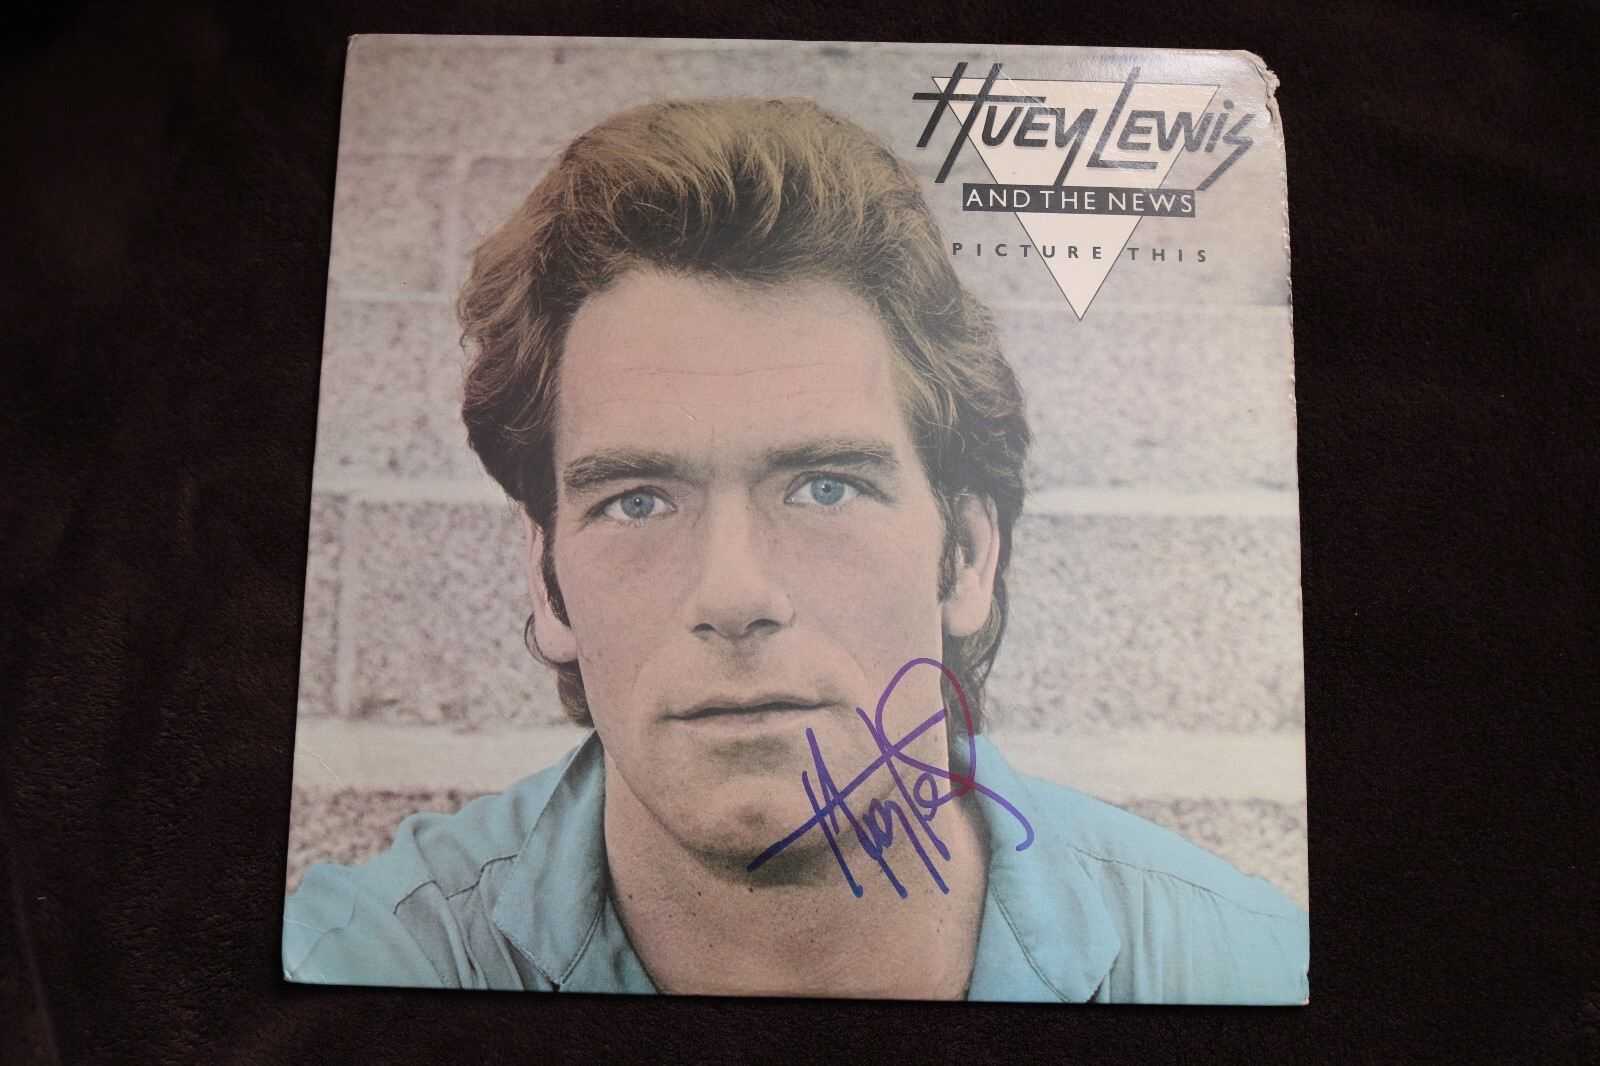 Huey Lewis Signed Album Huey Lewis & The News Picture This w/ JSA AUTHENTICATION